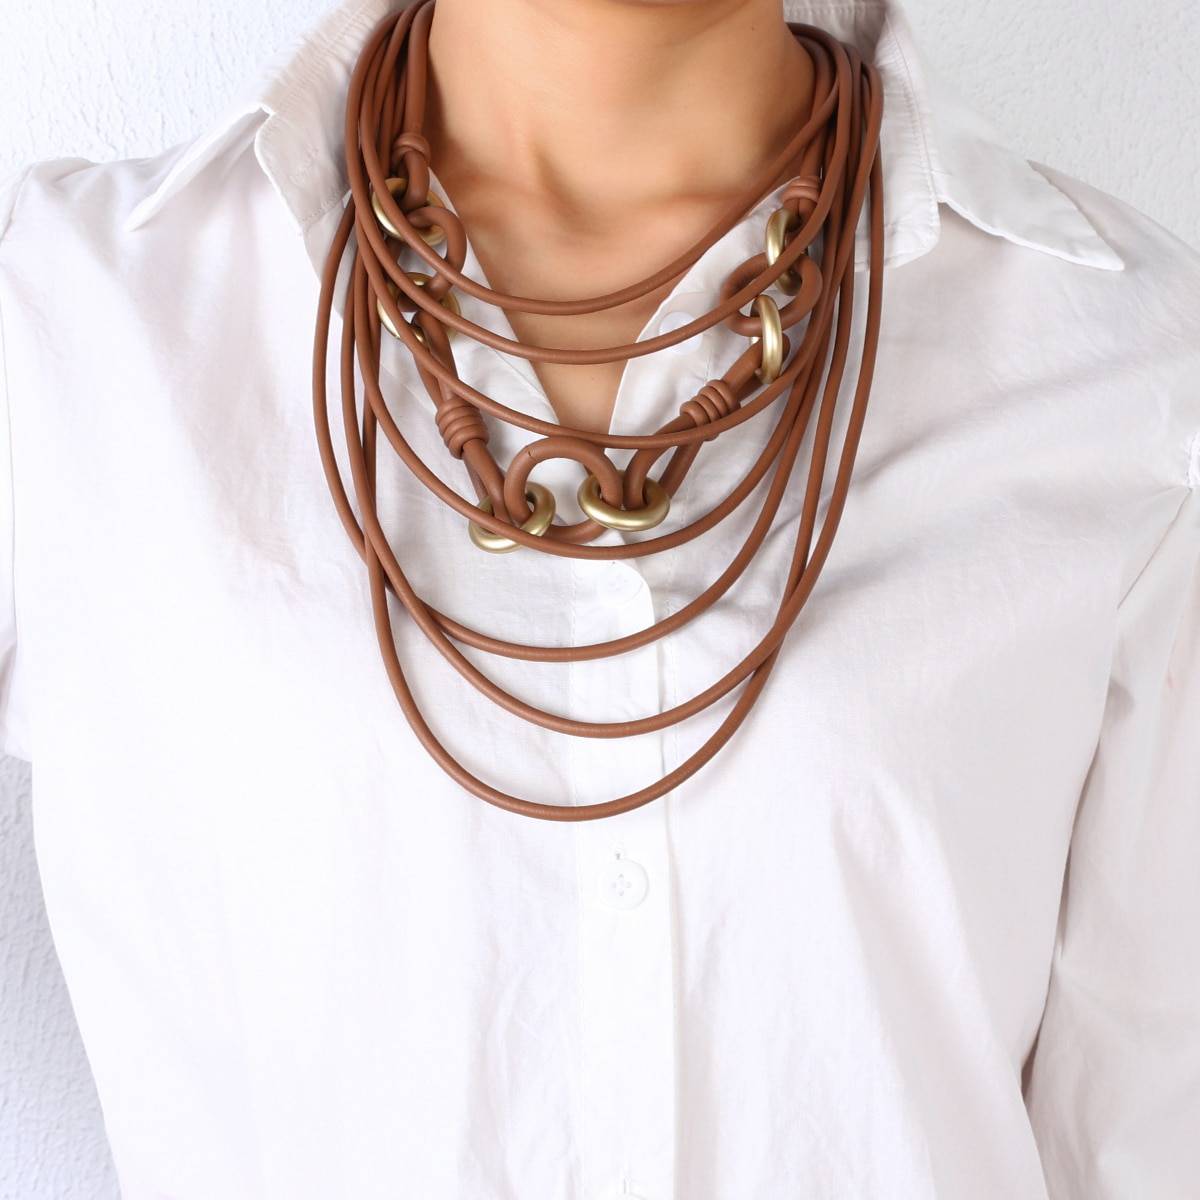 Amorcome Handmade Rubber on the Neck Long Necklace for Women Jewelry Punk Circle Sweater Chain Necklace Clothing Accessories Uncategorized 8d255f28538fbae46aeae7: Brown